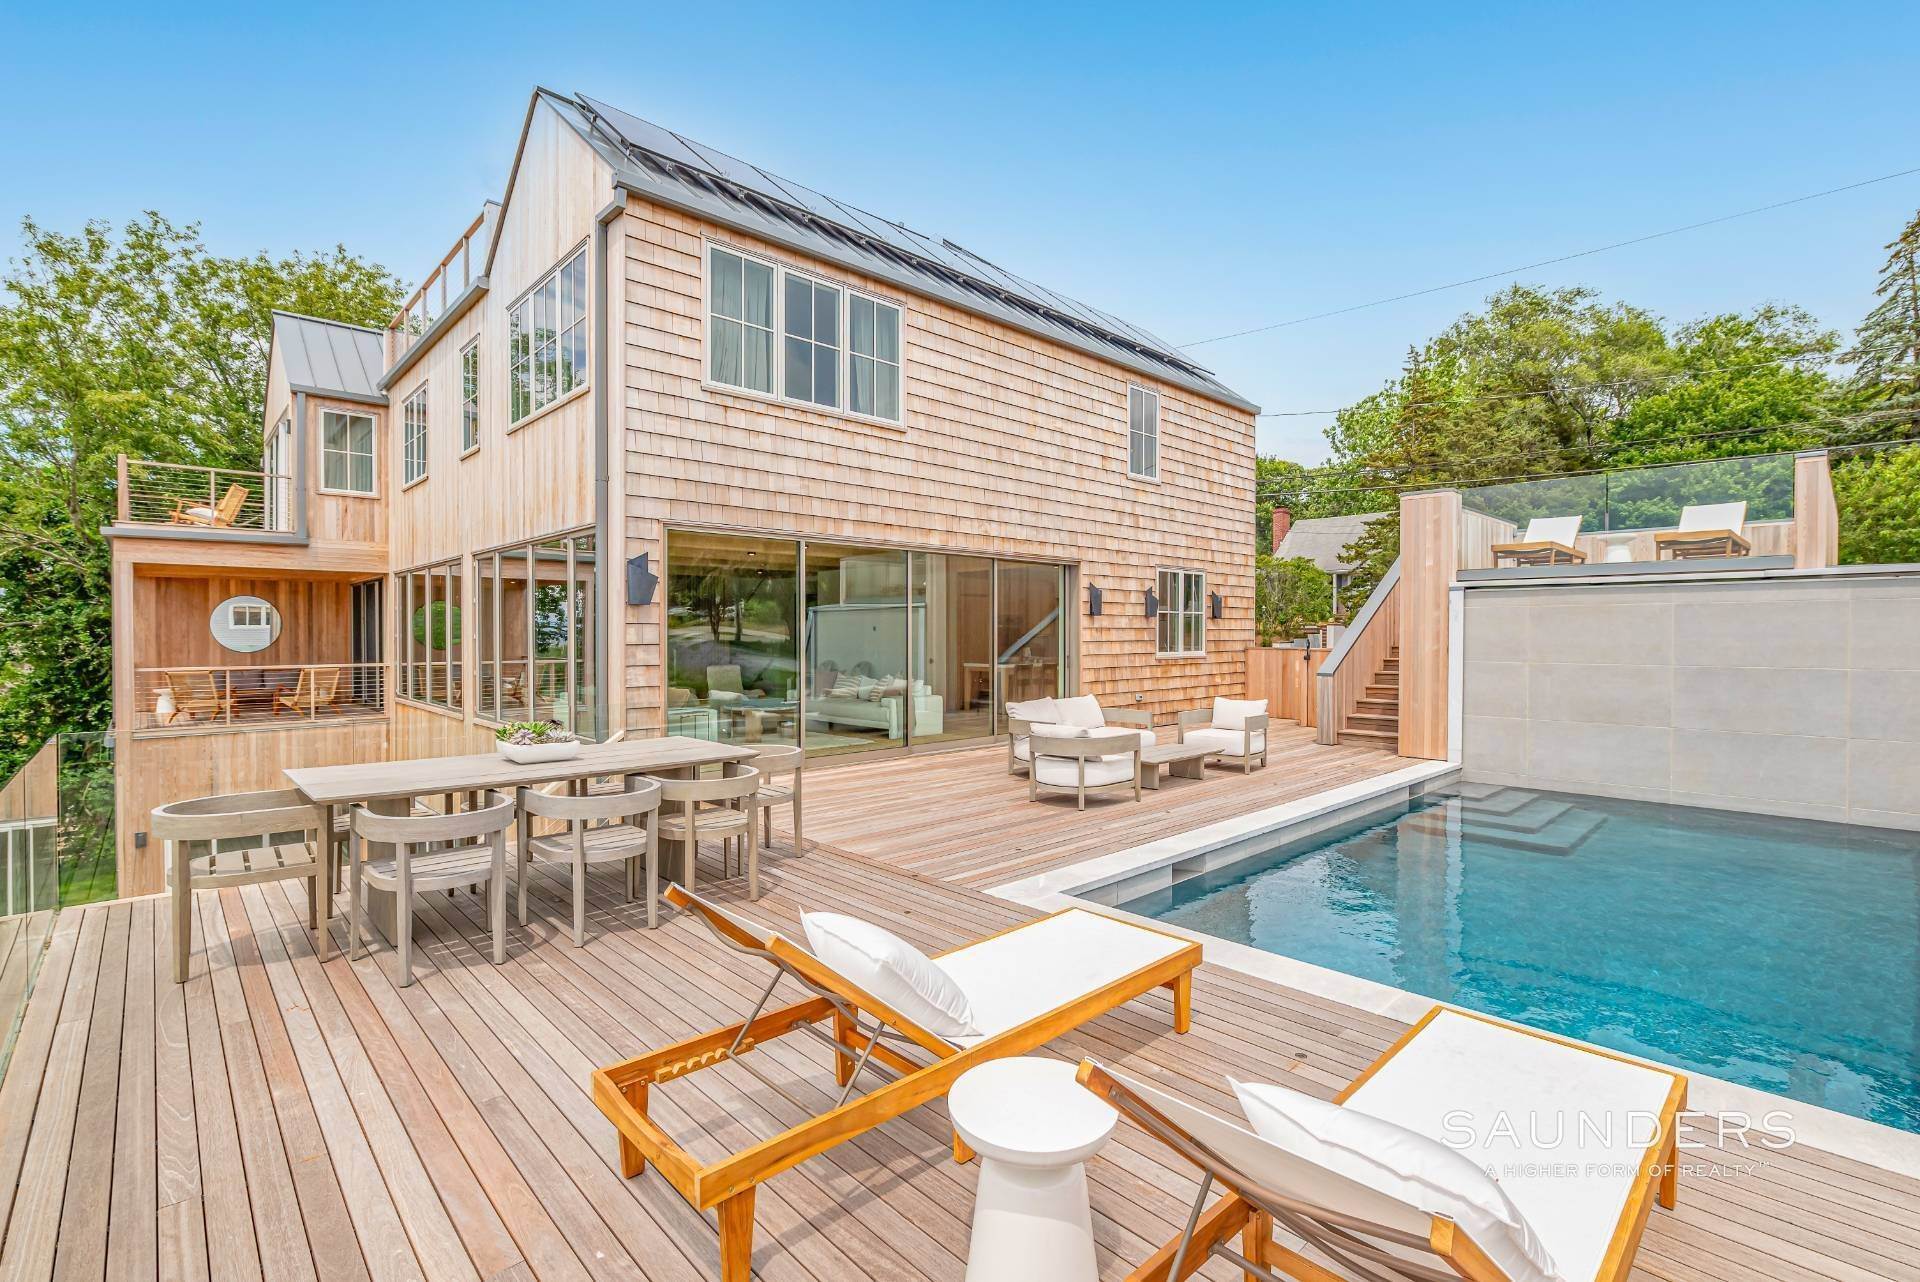 Single Family Homes for Sale at Waterfront Stunner In Sag Harbor With Pool 65 Cliff Drive, Sag Harbor, NY 11963